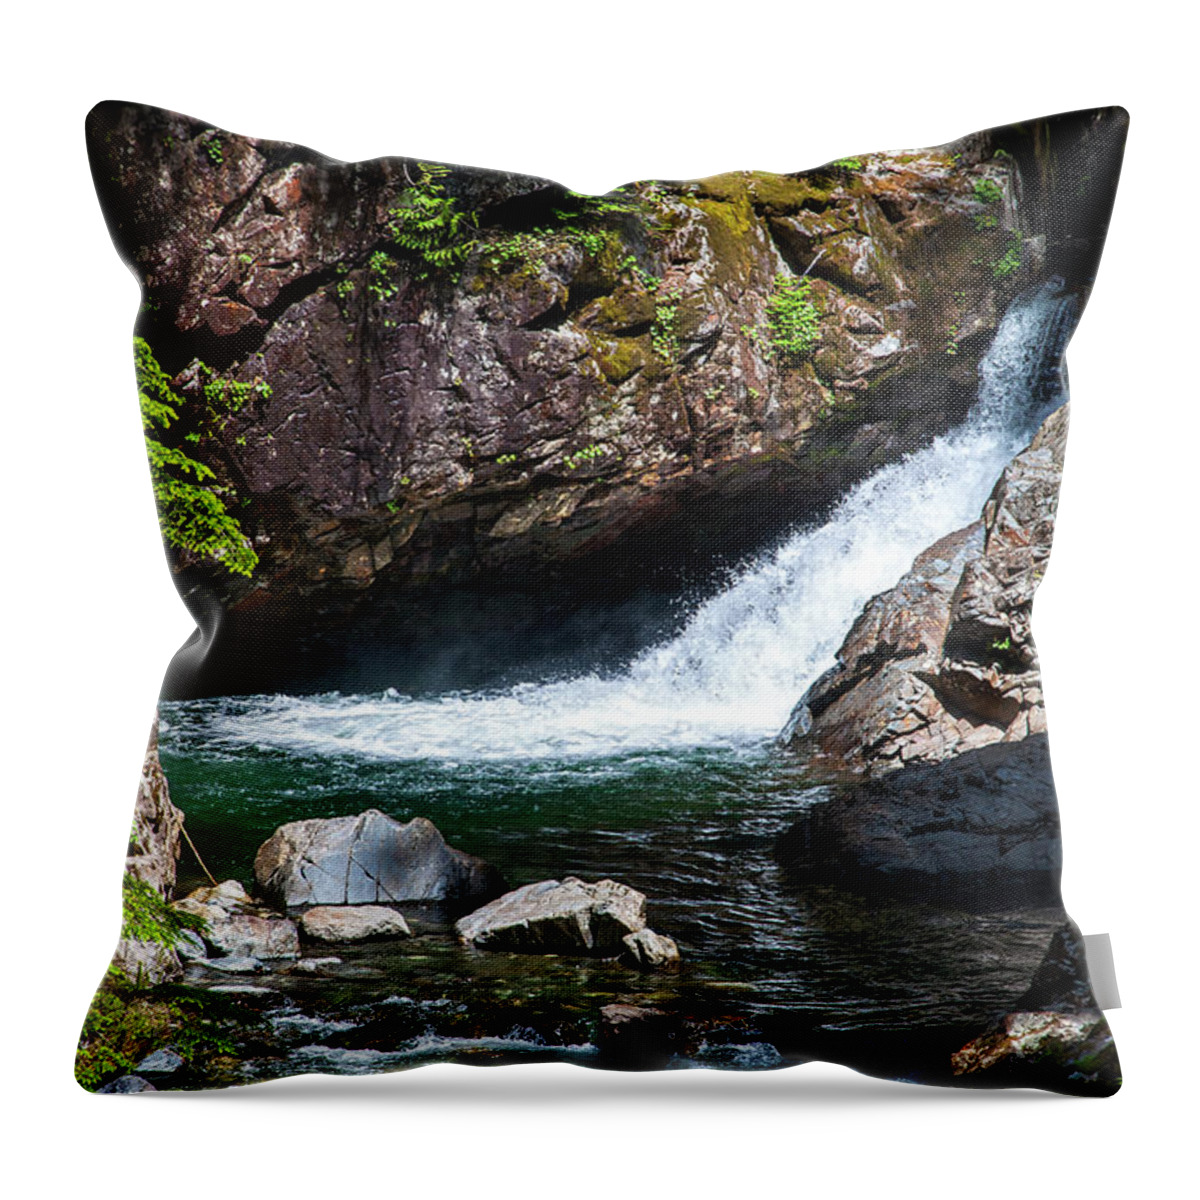 Cascade-mountains Throw Pillow featuring the photograph Small Waterfall In Mountain Stream by Kirt Tisdale